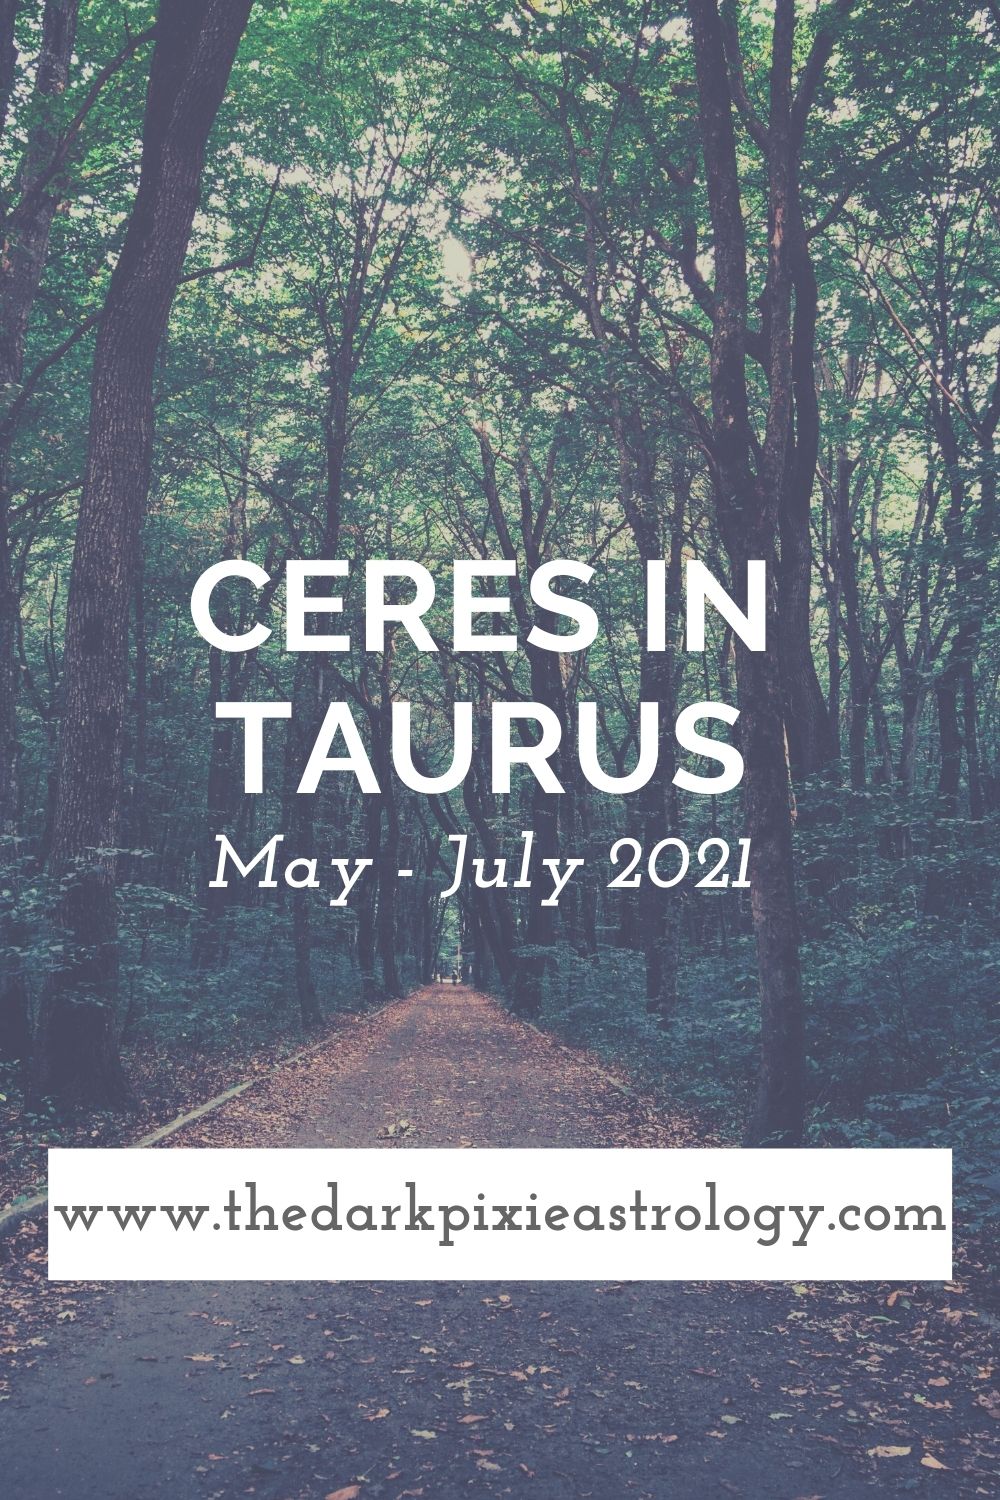 Ceres in Taurus: May - July 2021 - The Dark Pixie Astrology